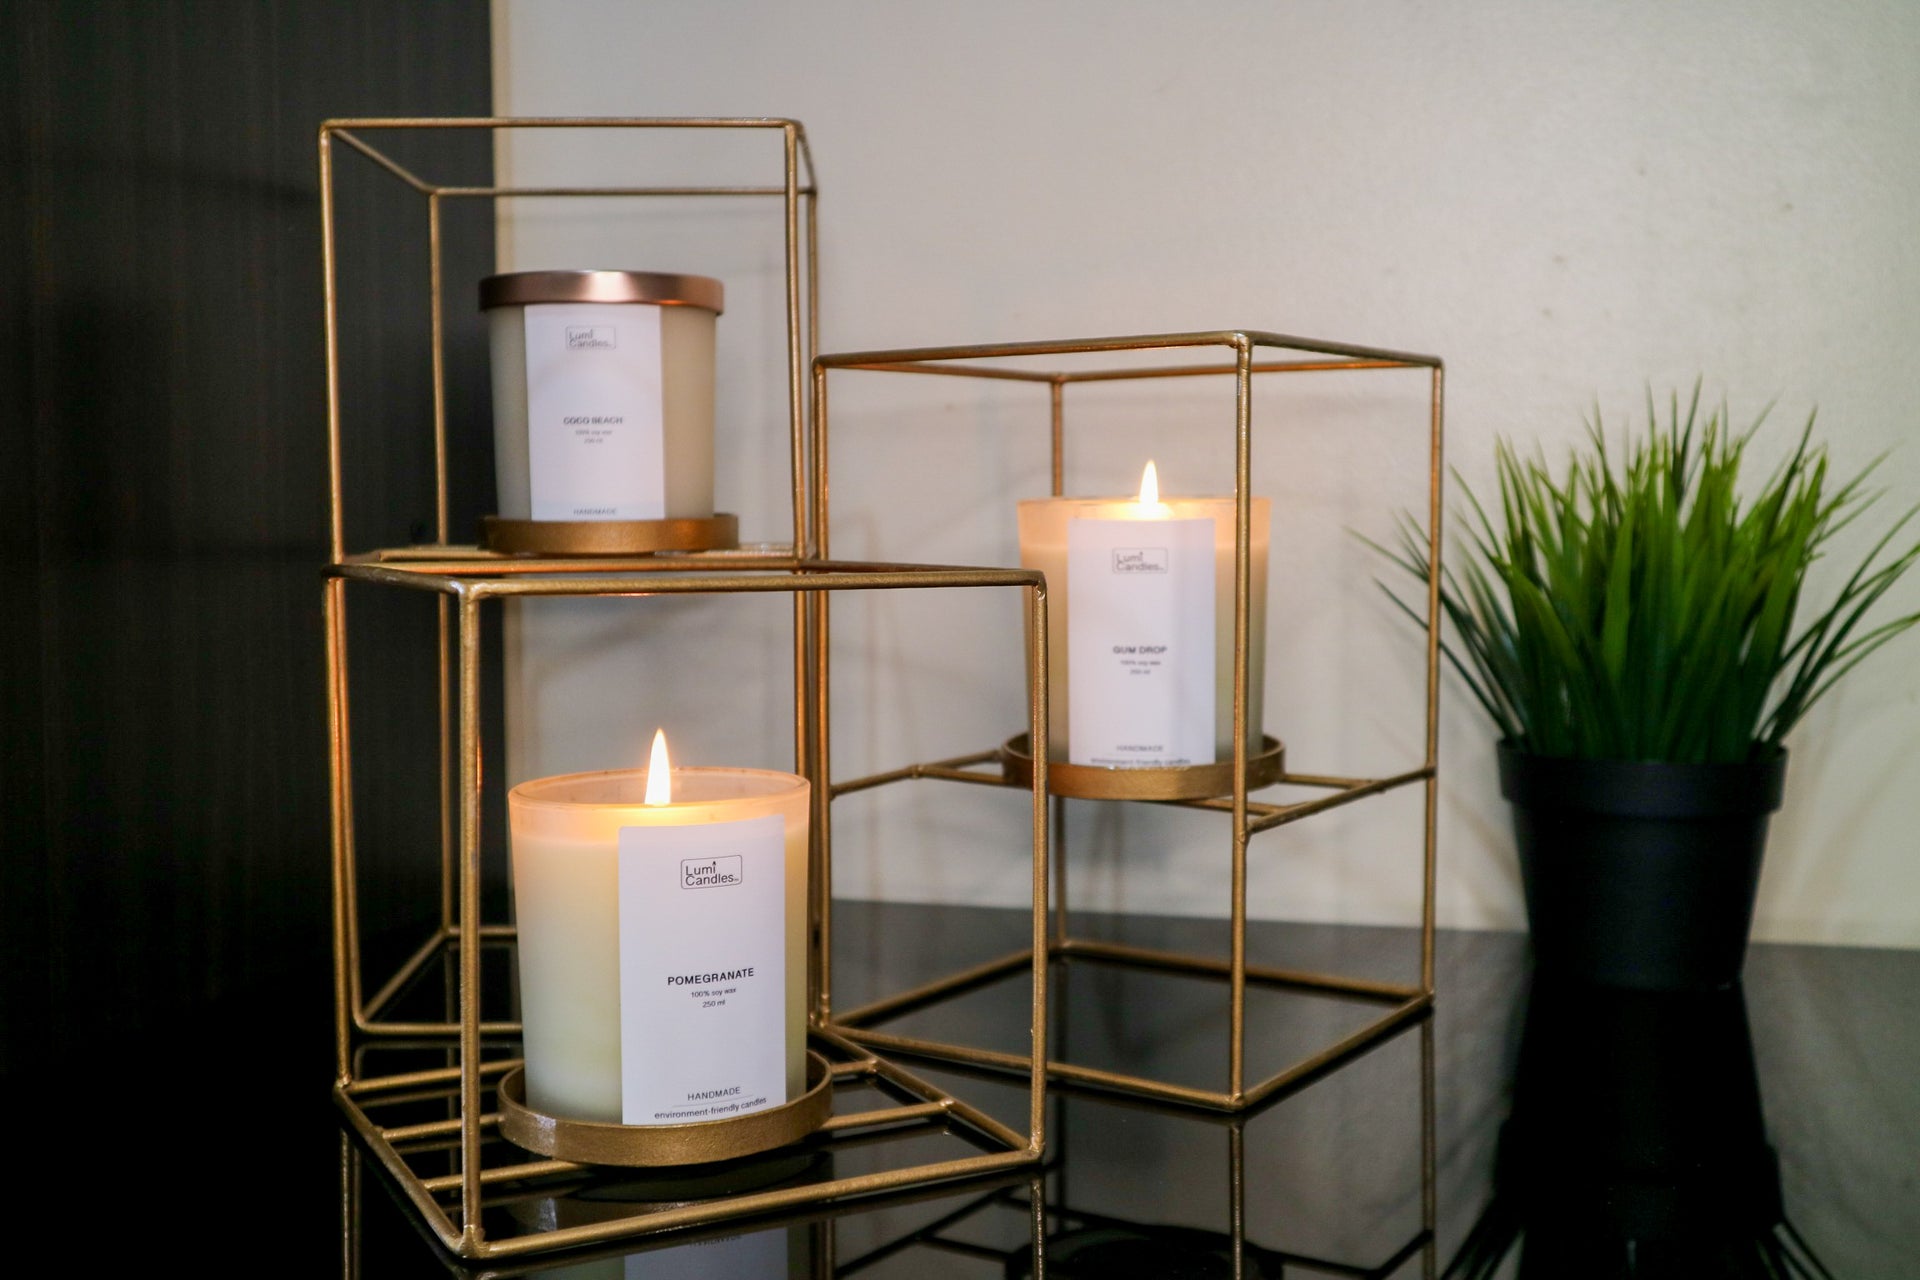 3-Tier Nordic Style Candle Holder by Lumi Candles PH